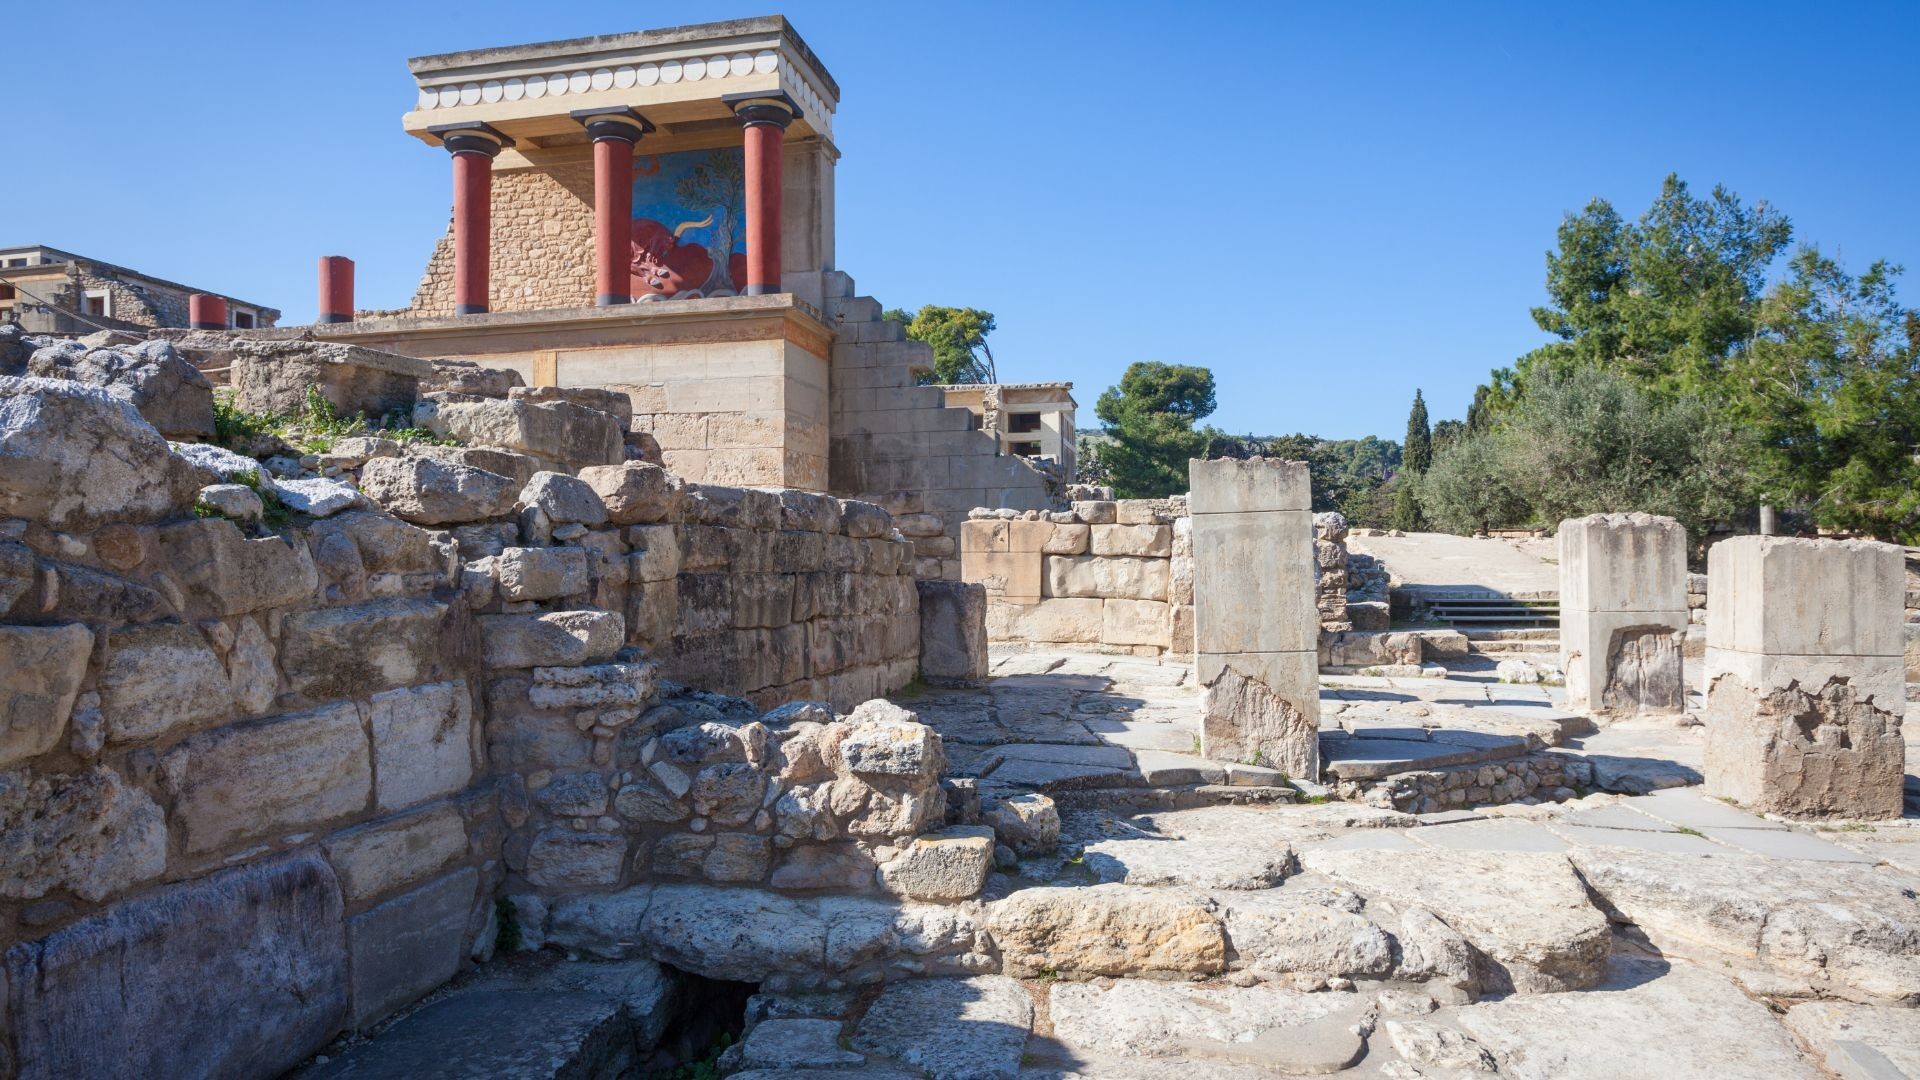 Crete2Go takes you back in time by discovering ancient sites